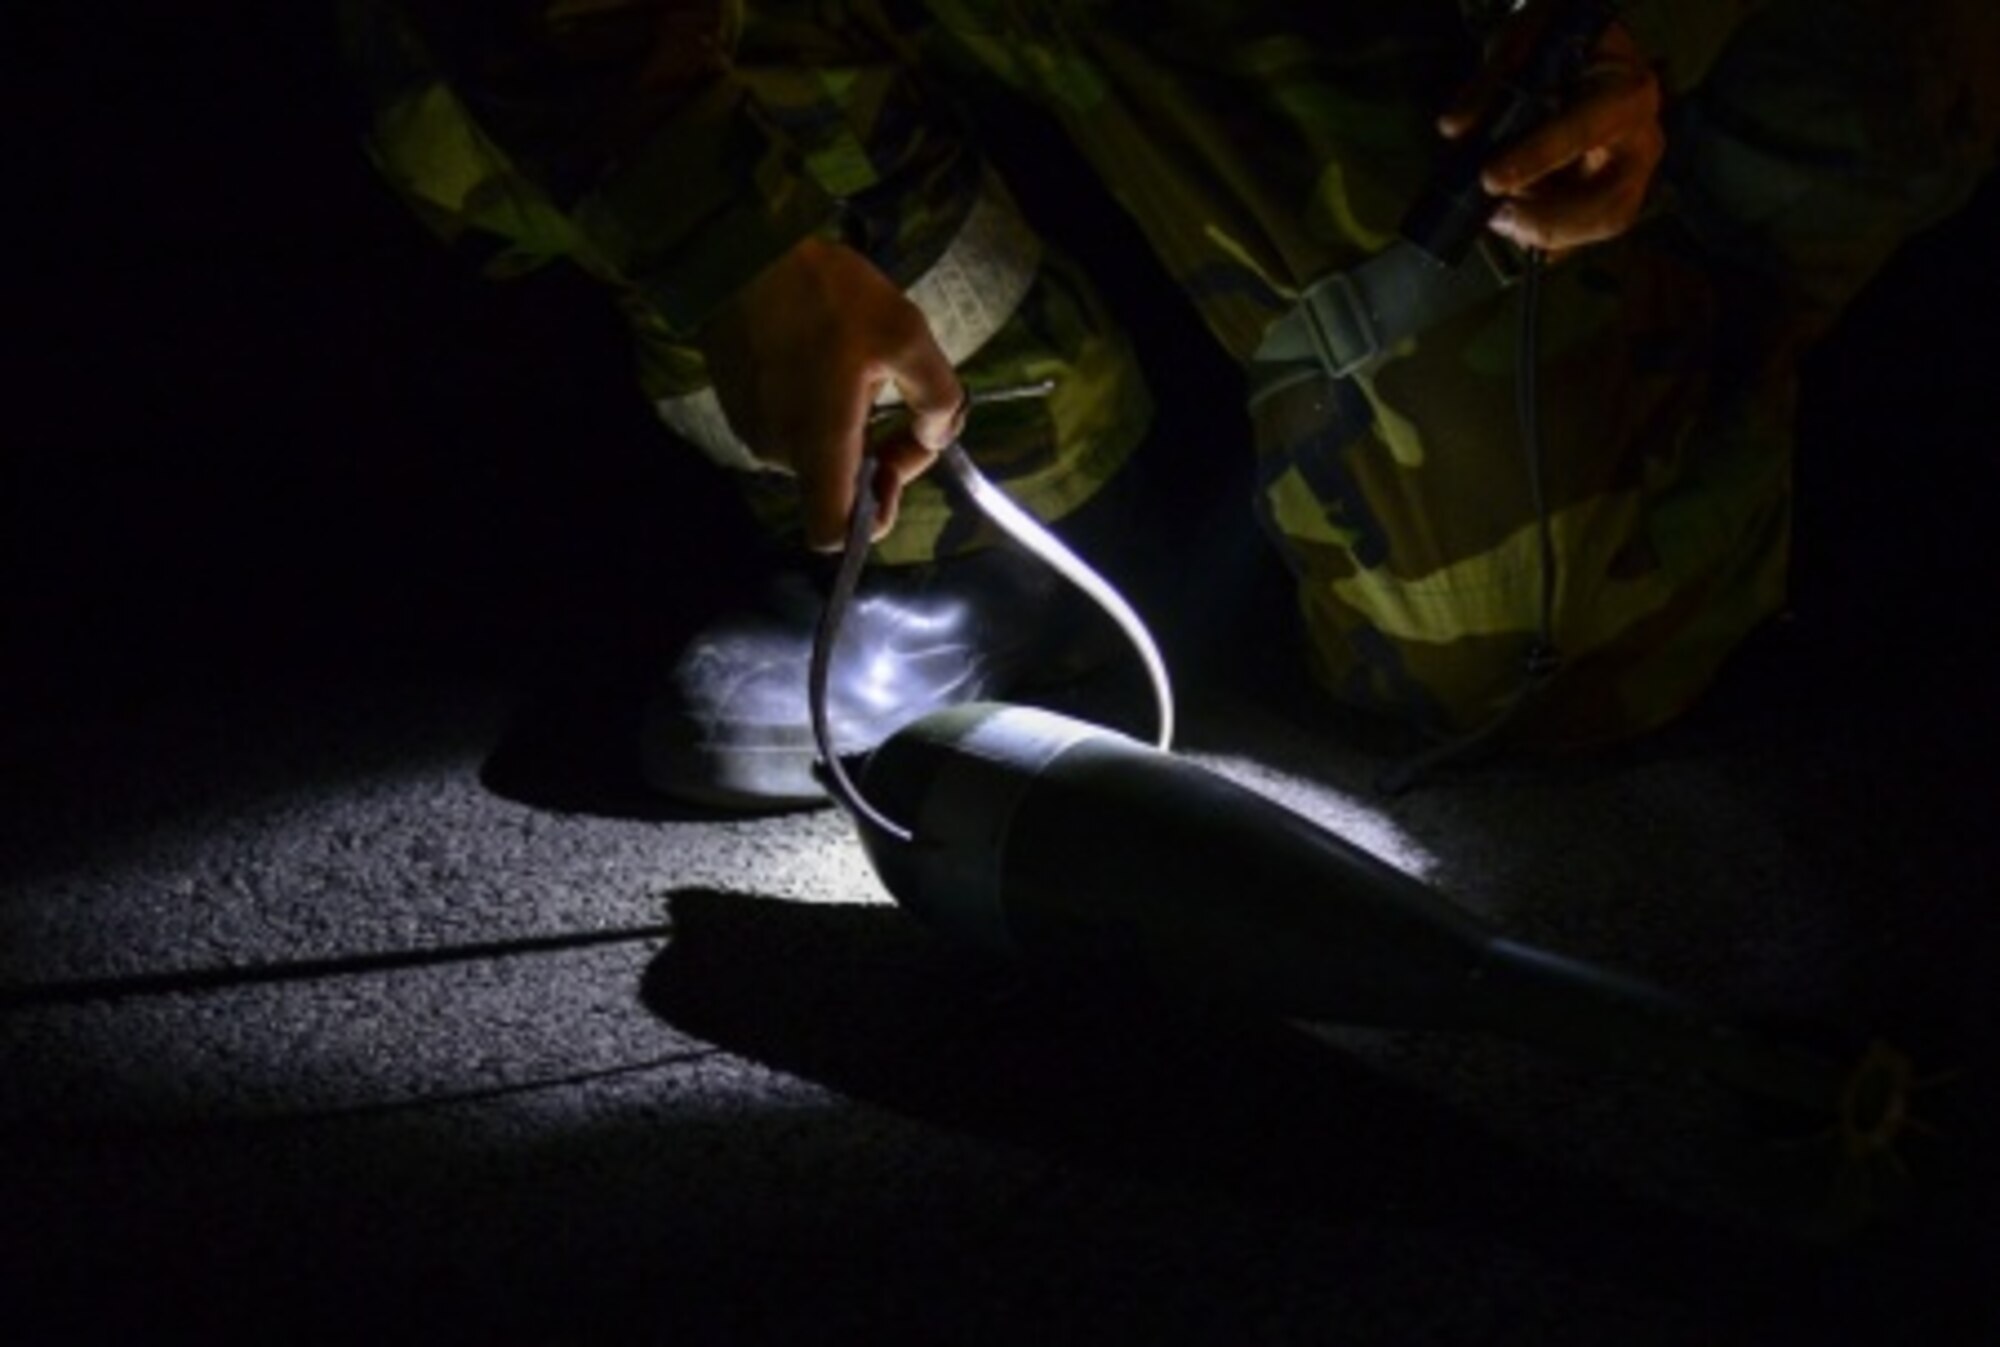 A 51st Civil Engineer Squadron explosive ordnance disposal technician measures the diameter of a simulated unexploded mortar round during a training scenario at Osan Air Base, South Korea, Nov. 6, 2015. After finding unexploded ordnance, EOD stores them to perform controlled detonations in a secured area. (U.S. Air Force photo/Tech. Sgt. Travis Edwards)